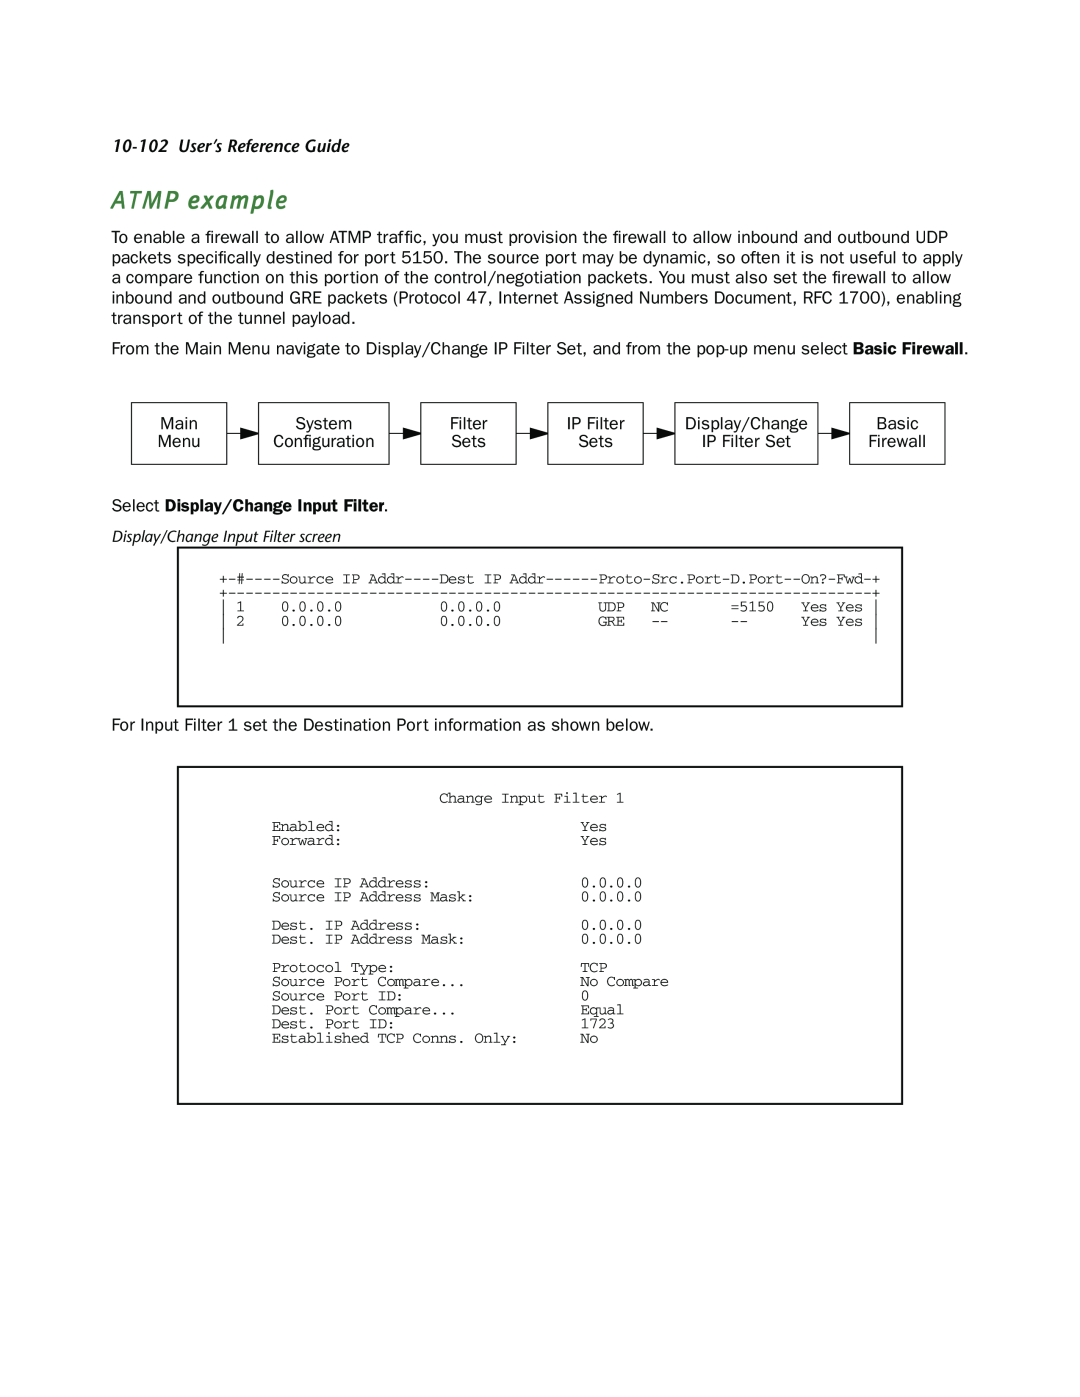 Netopia R910 manual ATMP example, User’s Reference Guide 